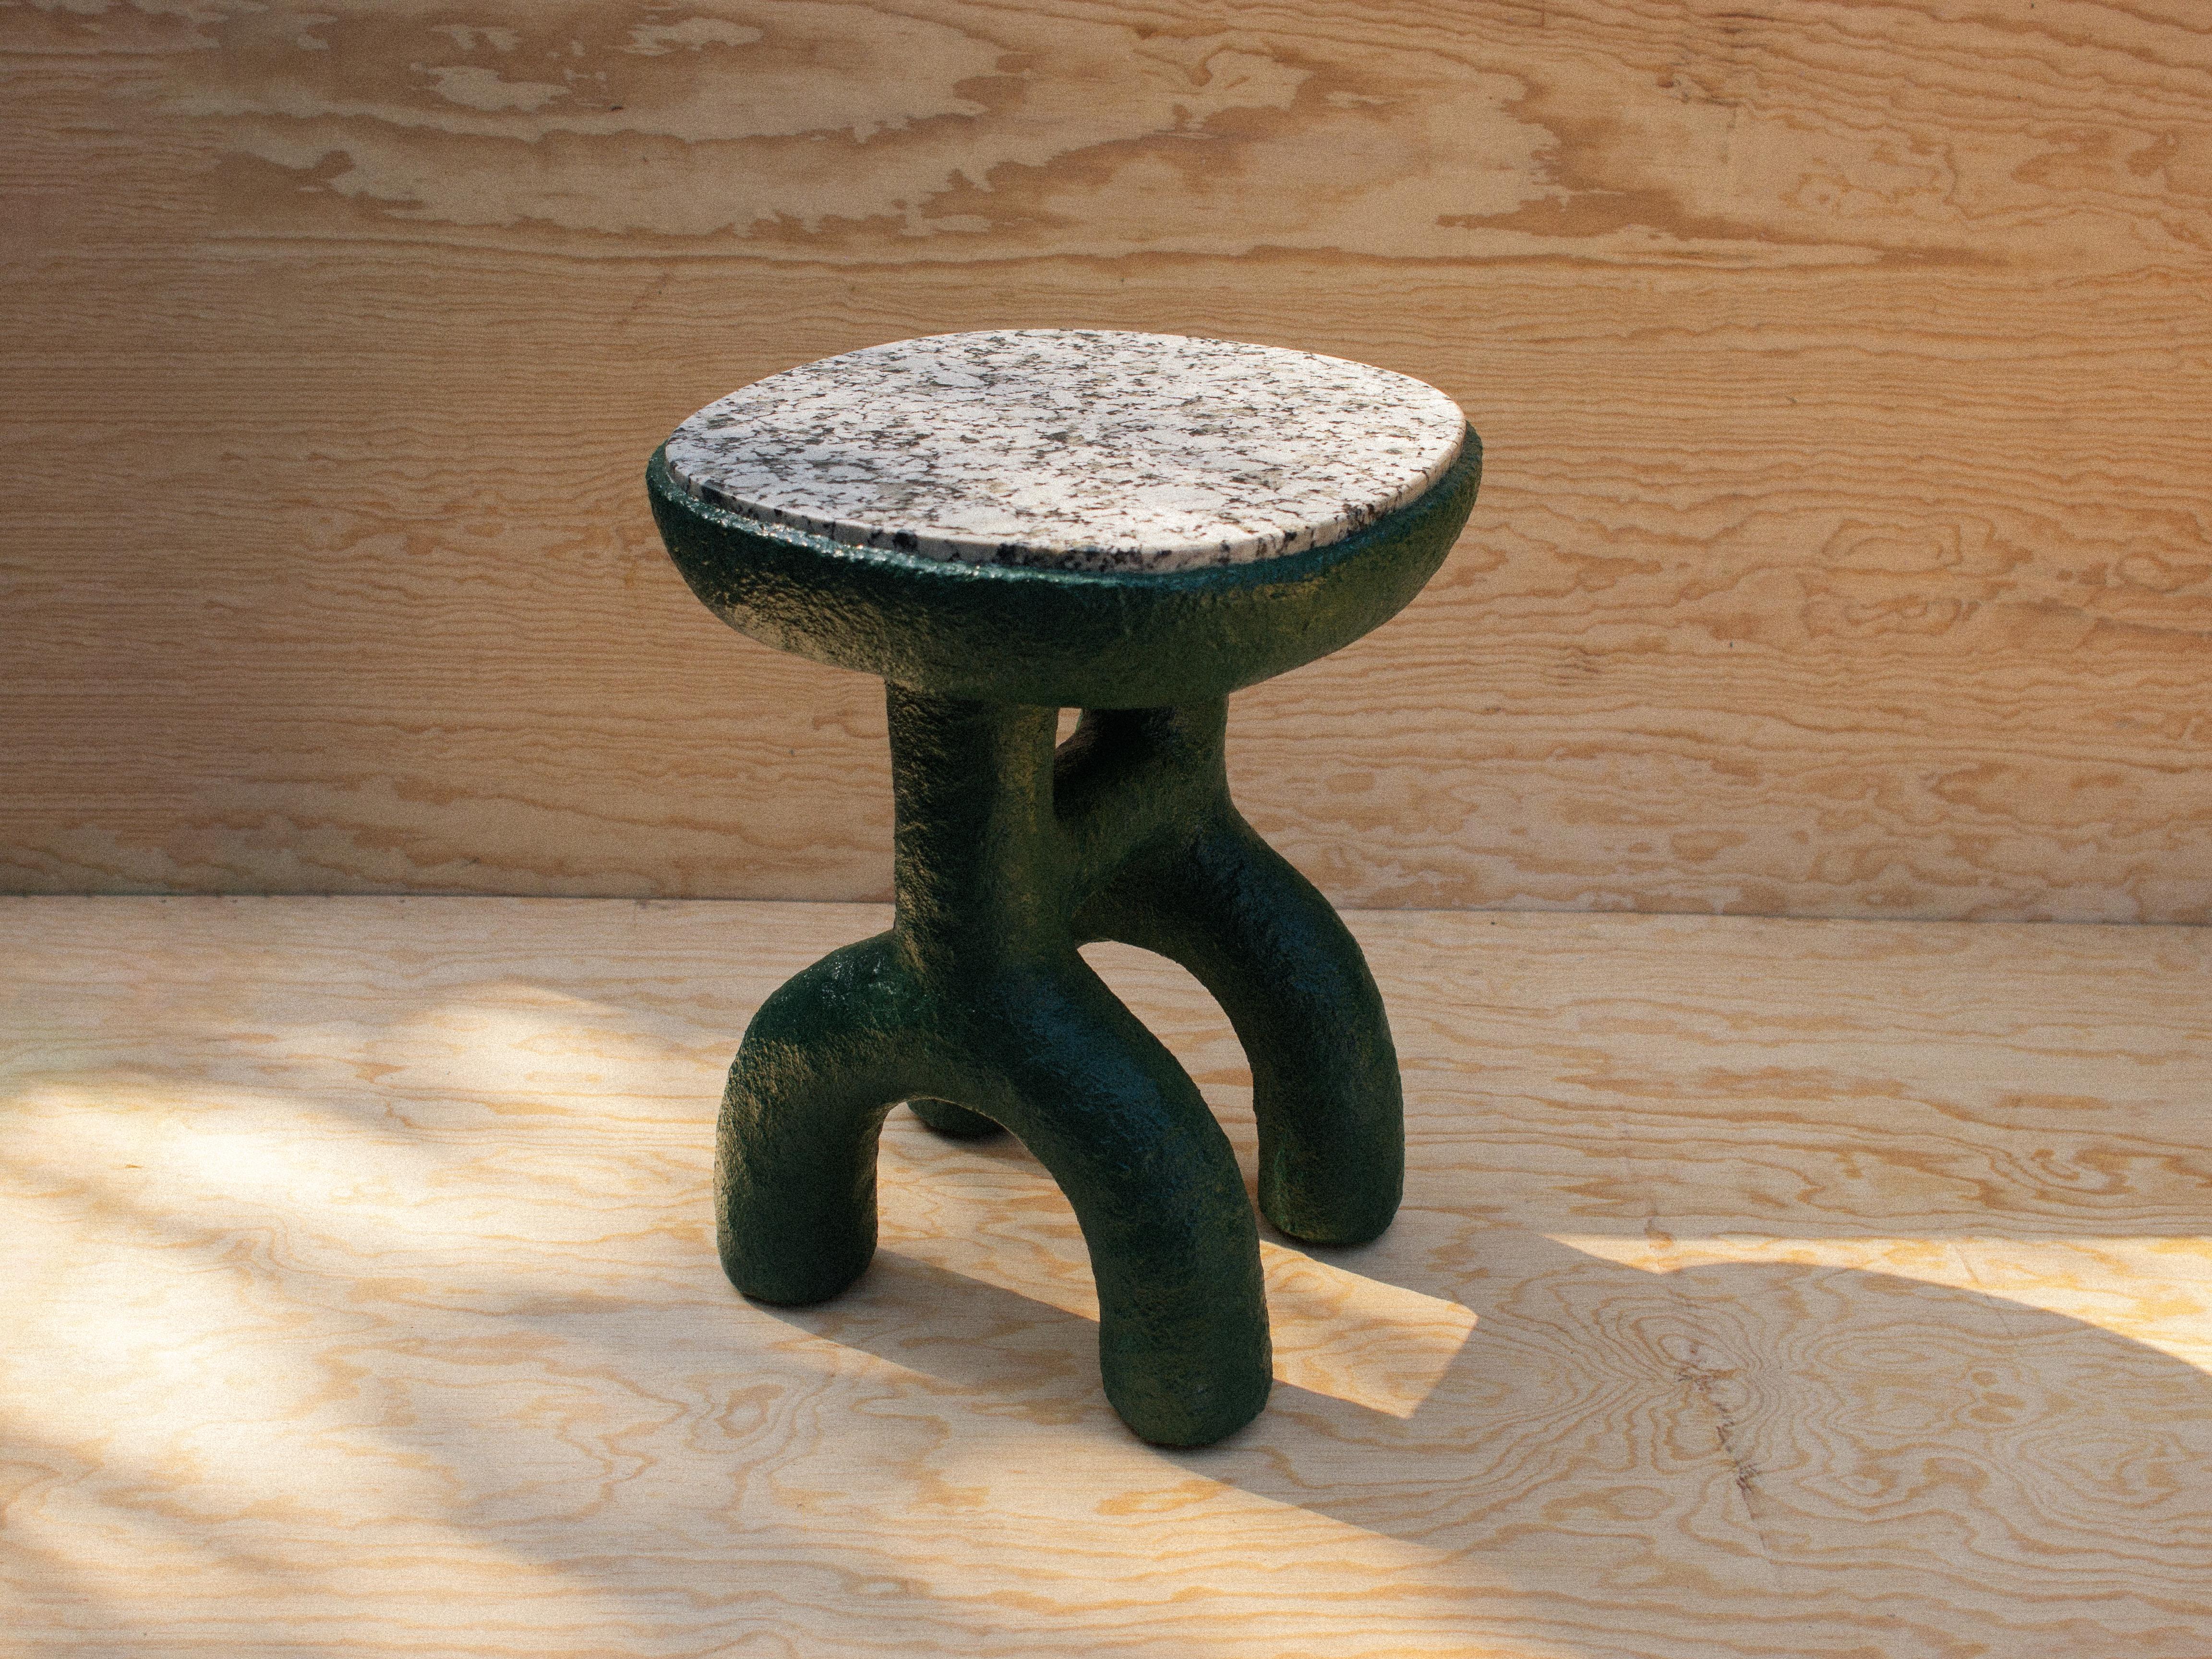 Arquería Ocasional Side Table by Algo Studio
Dimensions: D 42 x W 46 x H 54 cm.
Materials: Plywood, foamular, PVA glue, sand, pigments, polyurethane and granite.
Weight: 25 kg.

Custom colors available. Please contact us.

Algo Studio, based